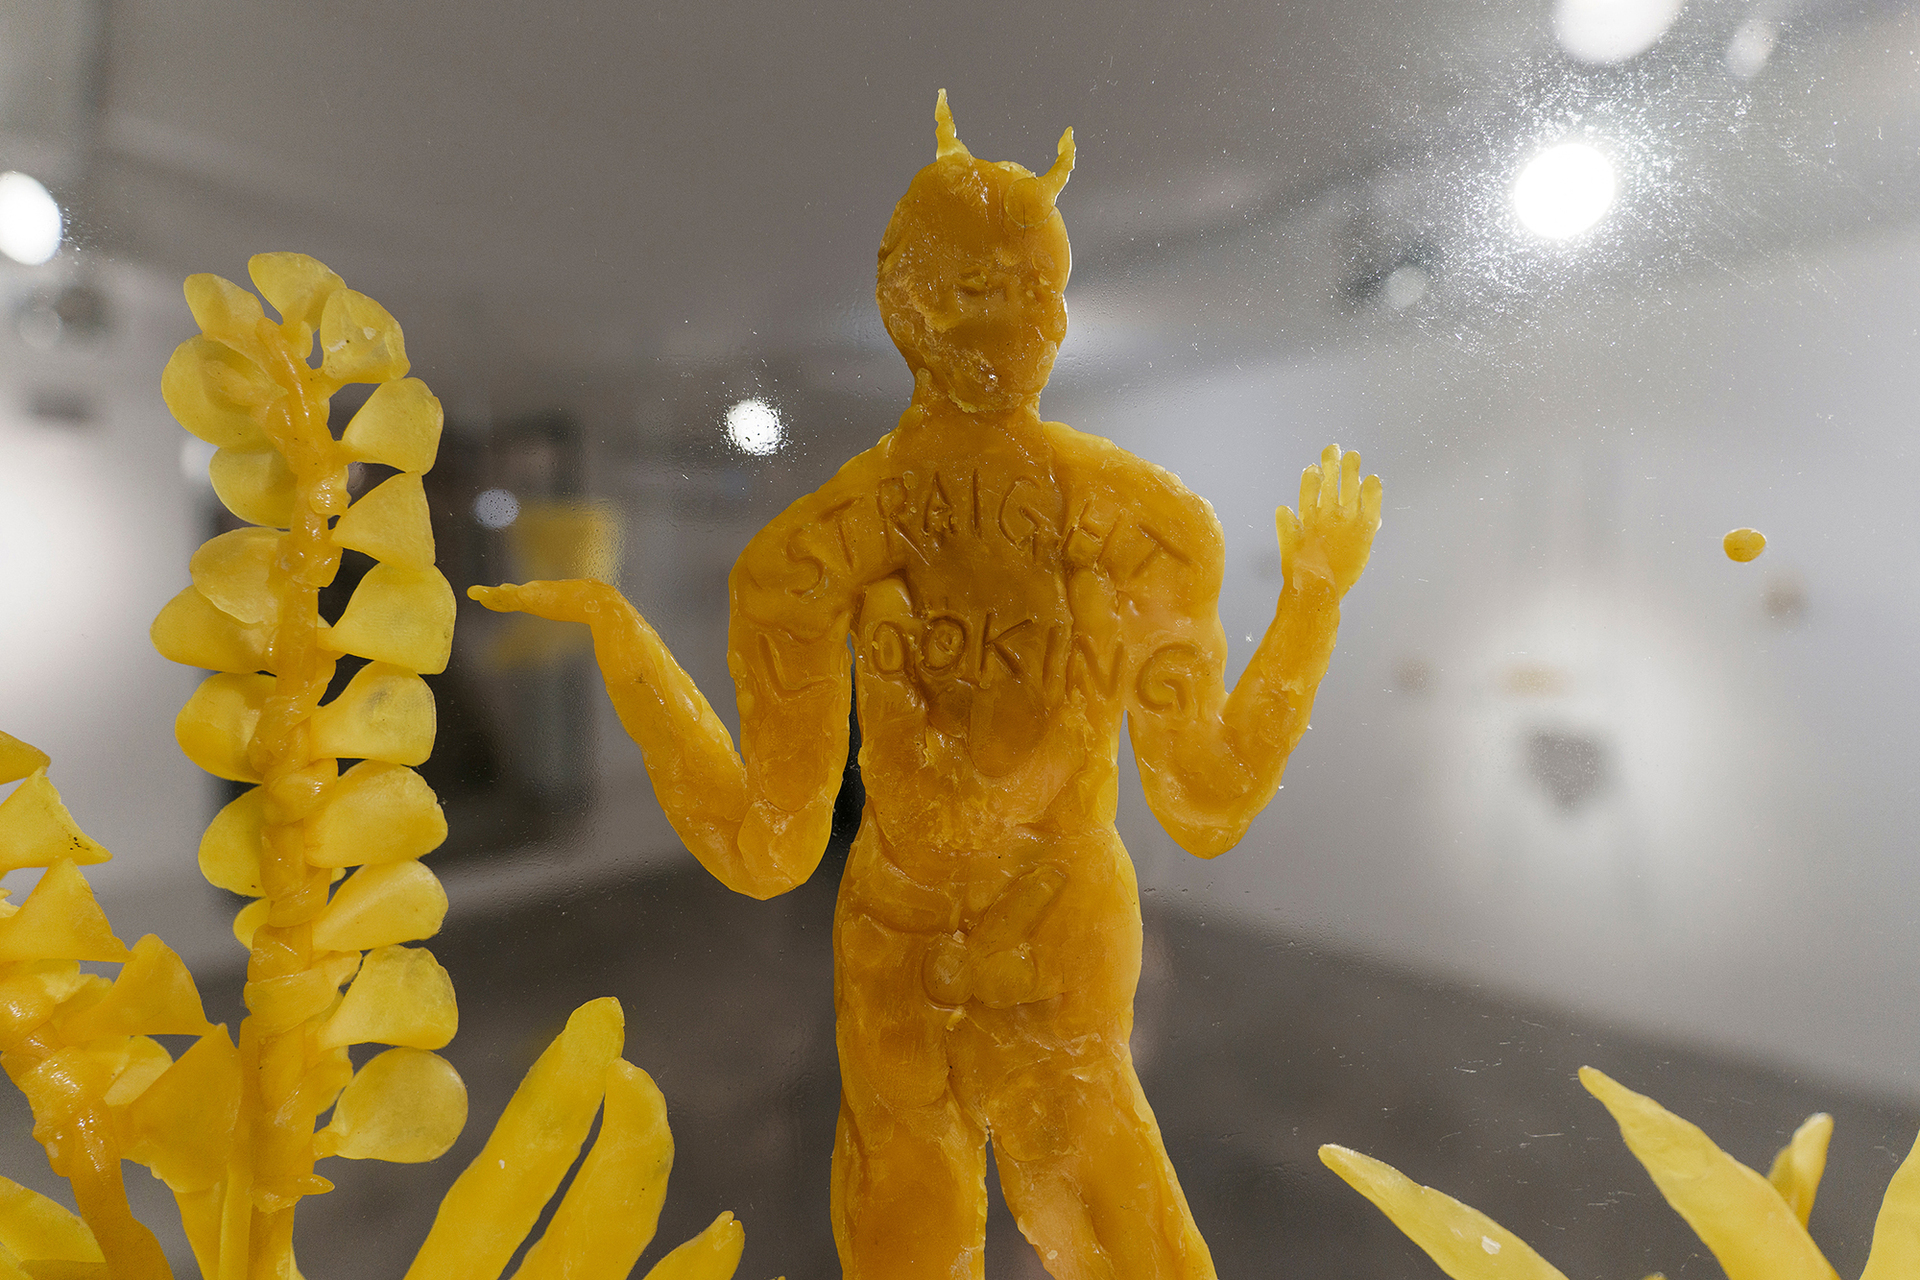 Gideon Horváth, Faun with a hard on looking into the advanced future, 2021, beeswax, glass, 100x50 cm, detail, photo by Dávid Bíró